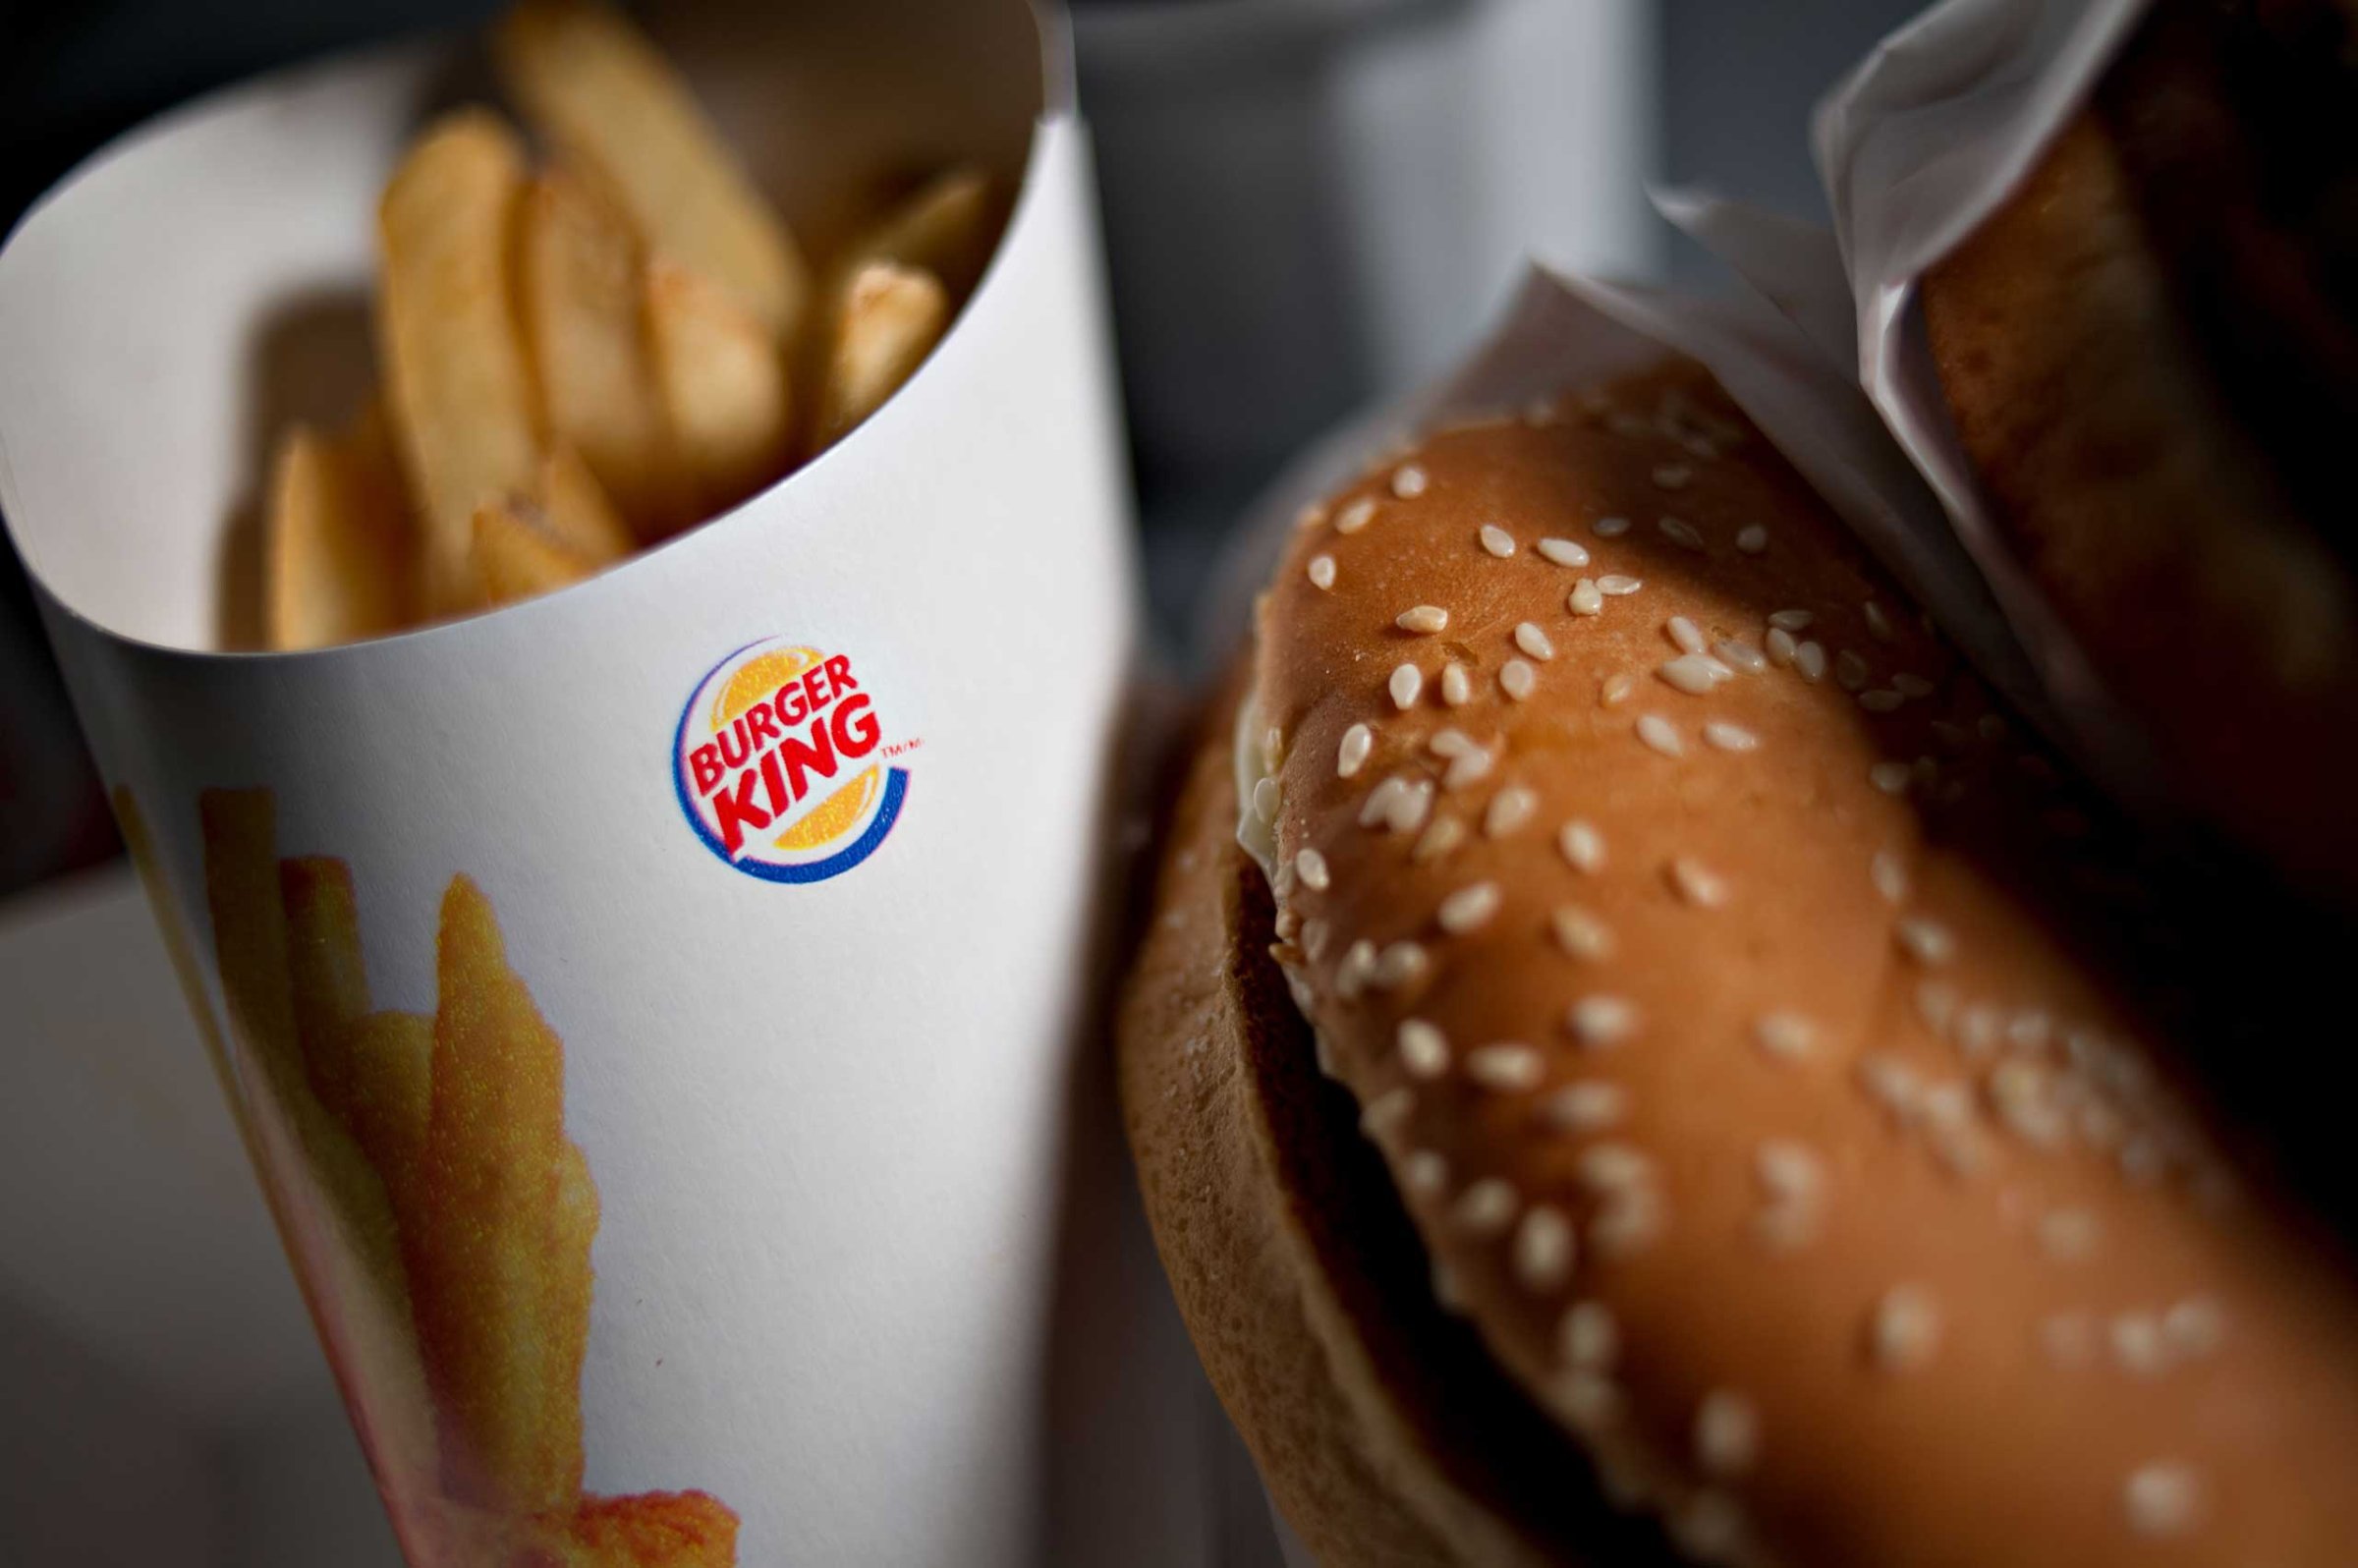 A Burger King Whopper hamburger is arranged with french fries for a photograph in Tiskilwa, Illinois, U.S., on Wednesday, Feb. 13, 2013.